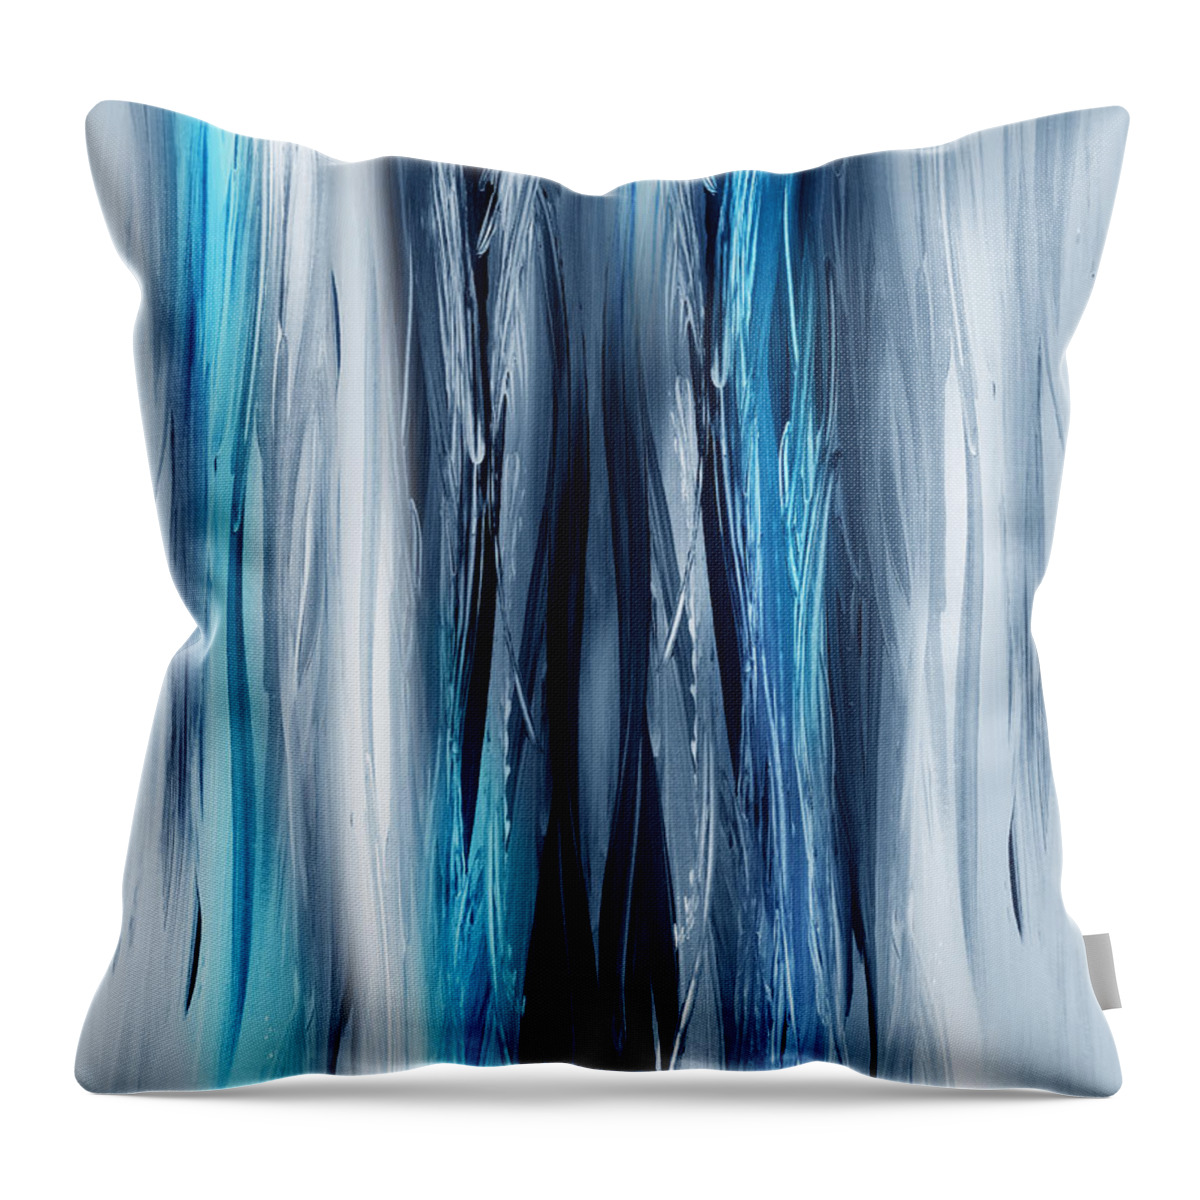 Waterfall Throw Pillow featuring the painting Abstract Waterfall Turquoise Flow by Irina Sztukowski